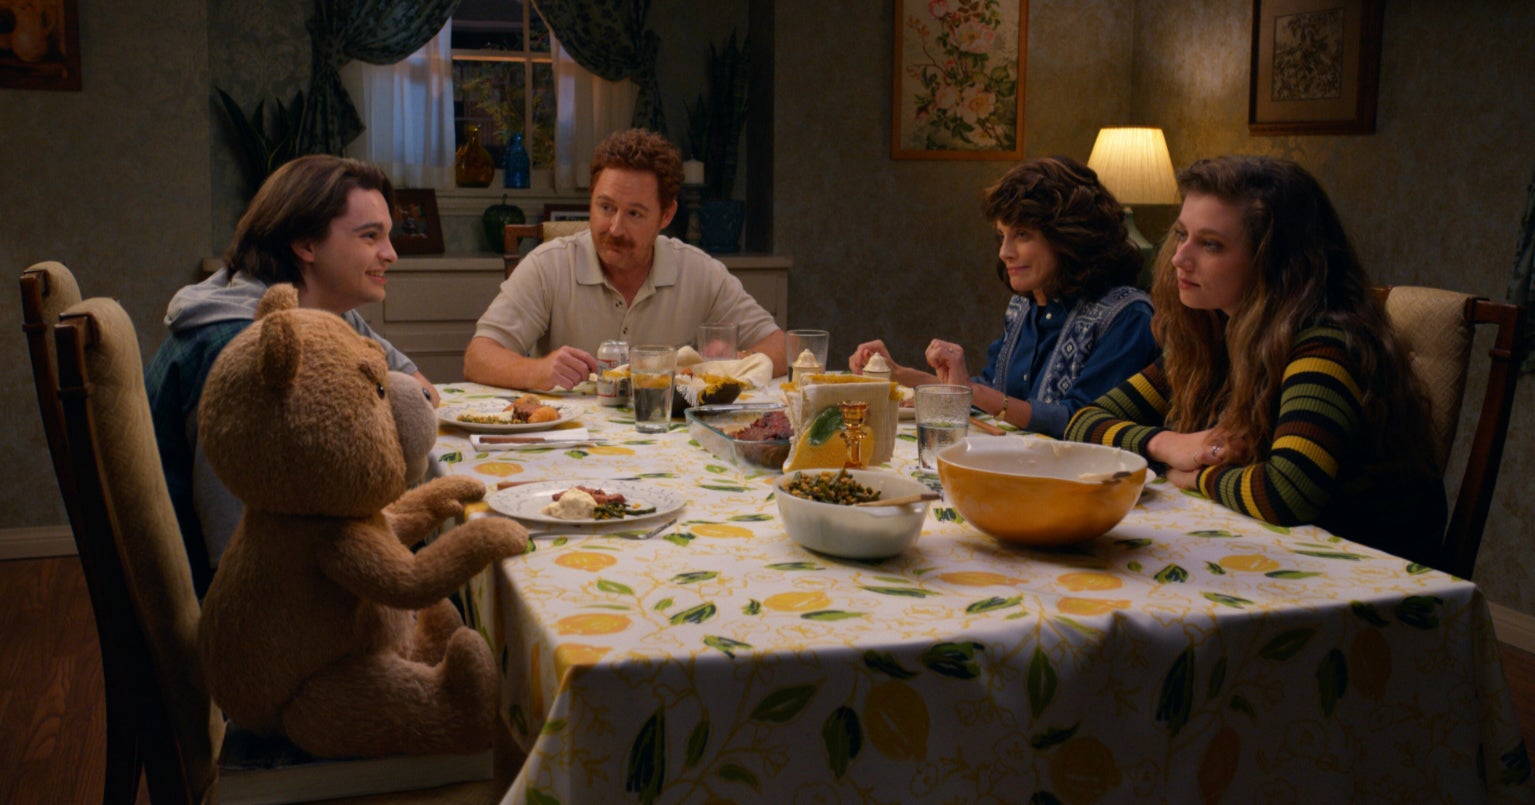 Max Burkholder, Alanna Eubach, Scott Grimes and Giorgia Whigham in the prequel series "Ted."